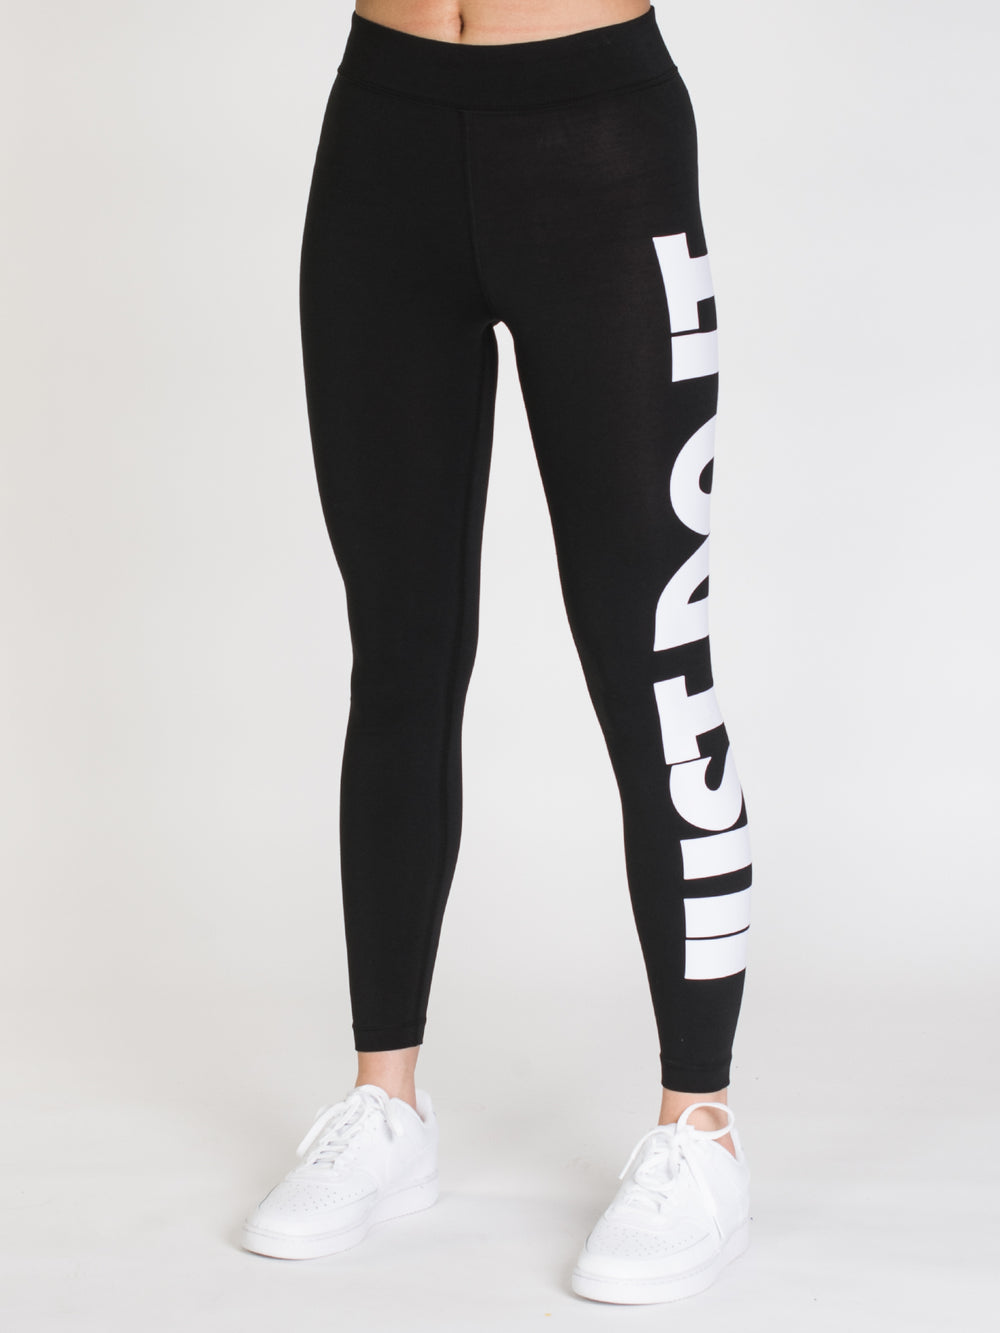 NIKE JUST DO IT LEGGING  - CLEARANCE